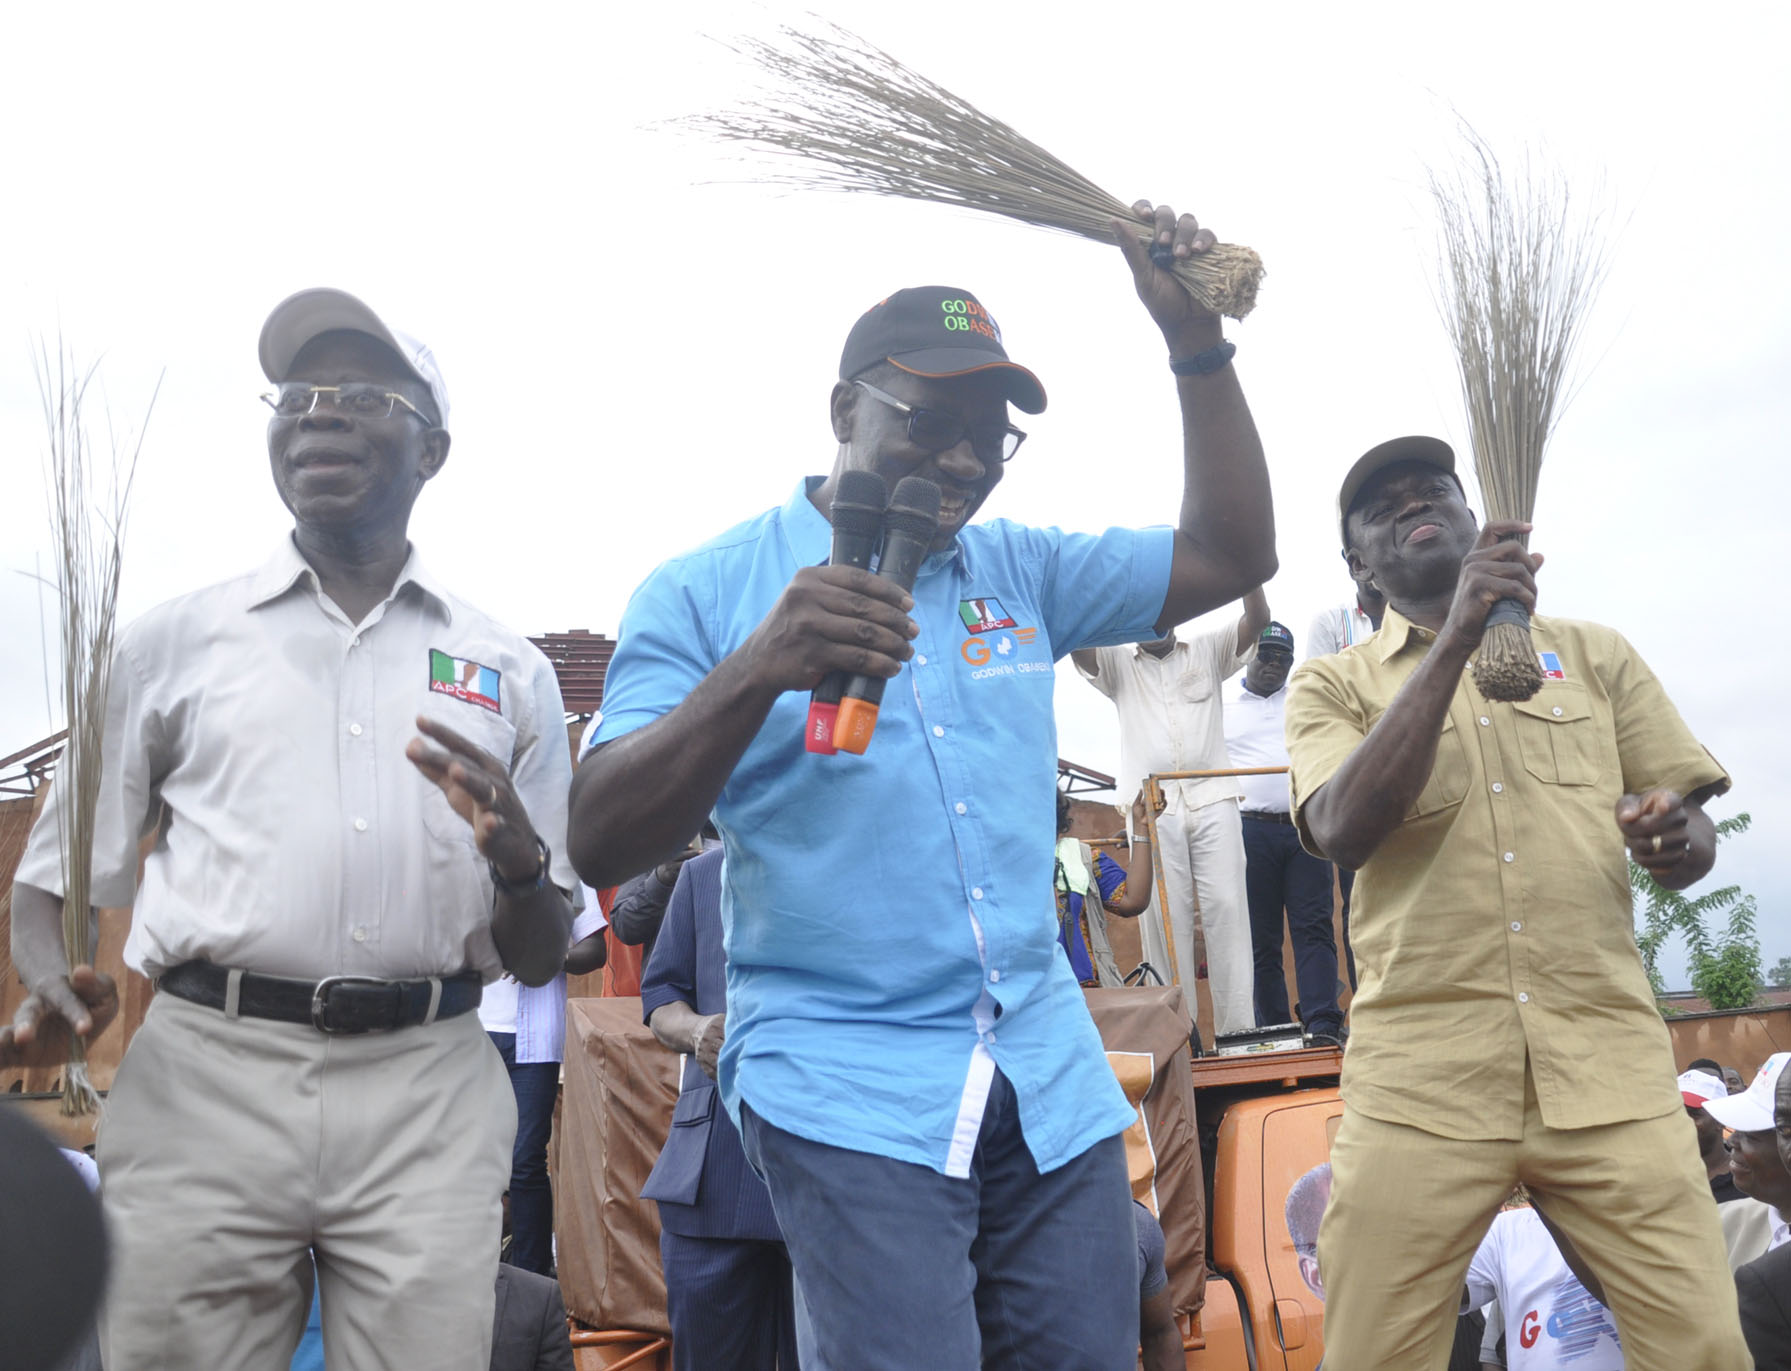 Godwin Obaseki, the candidate of the All Progressives Congress dancing at a campaign rally during his race for governor of Edo State. Beside him (left) is Governor Adams Oshiomhole, his political godfather.